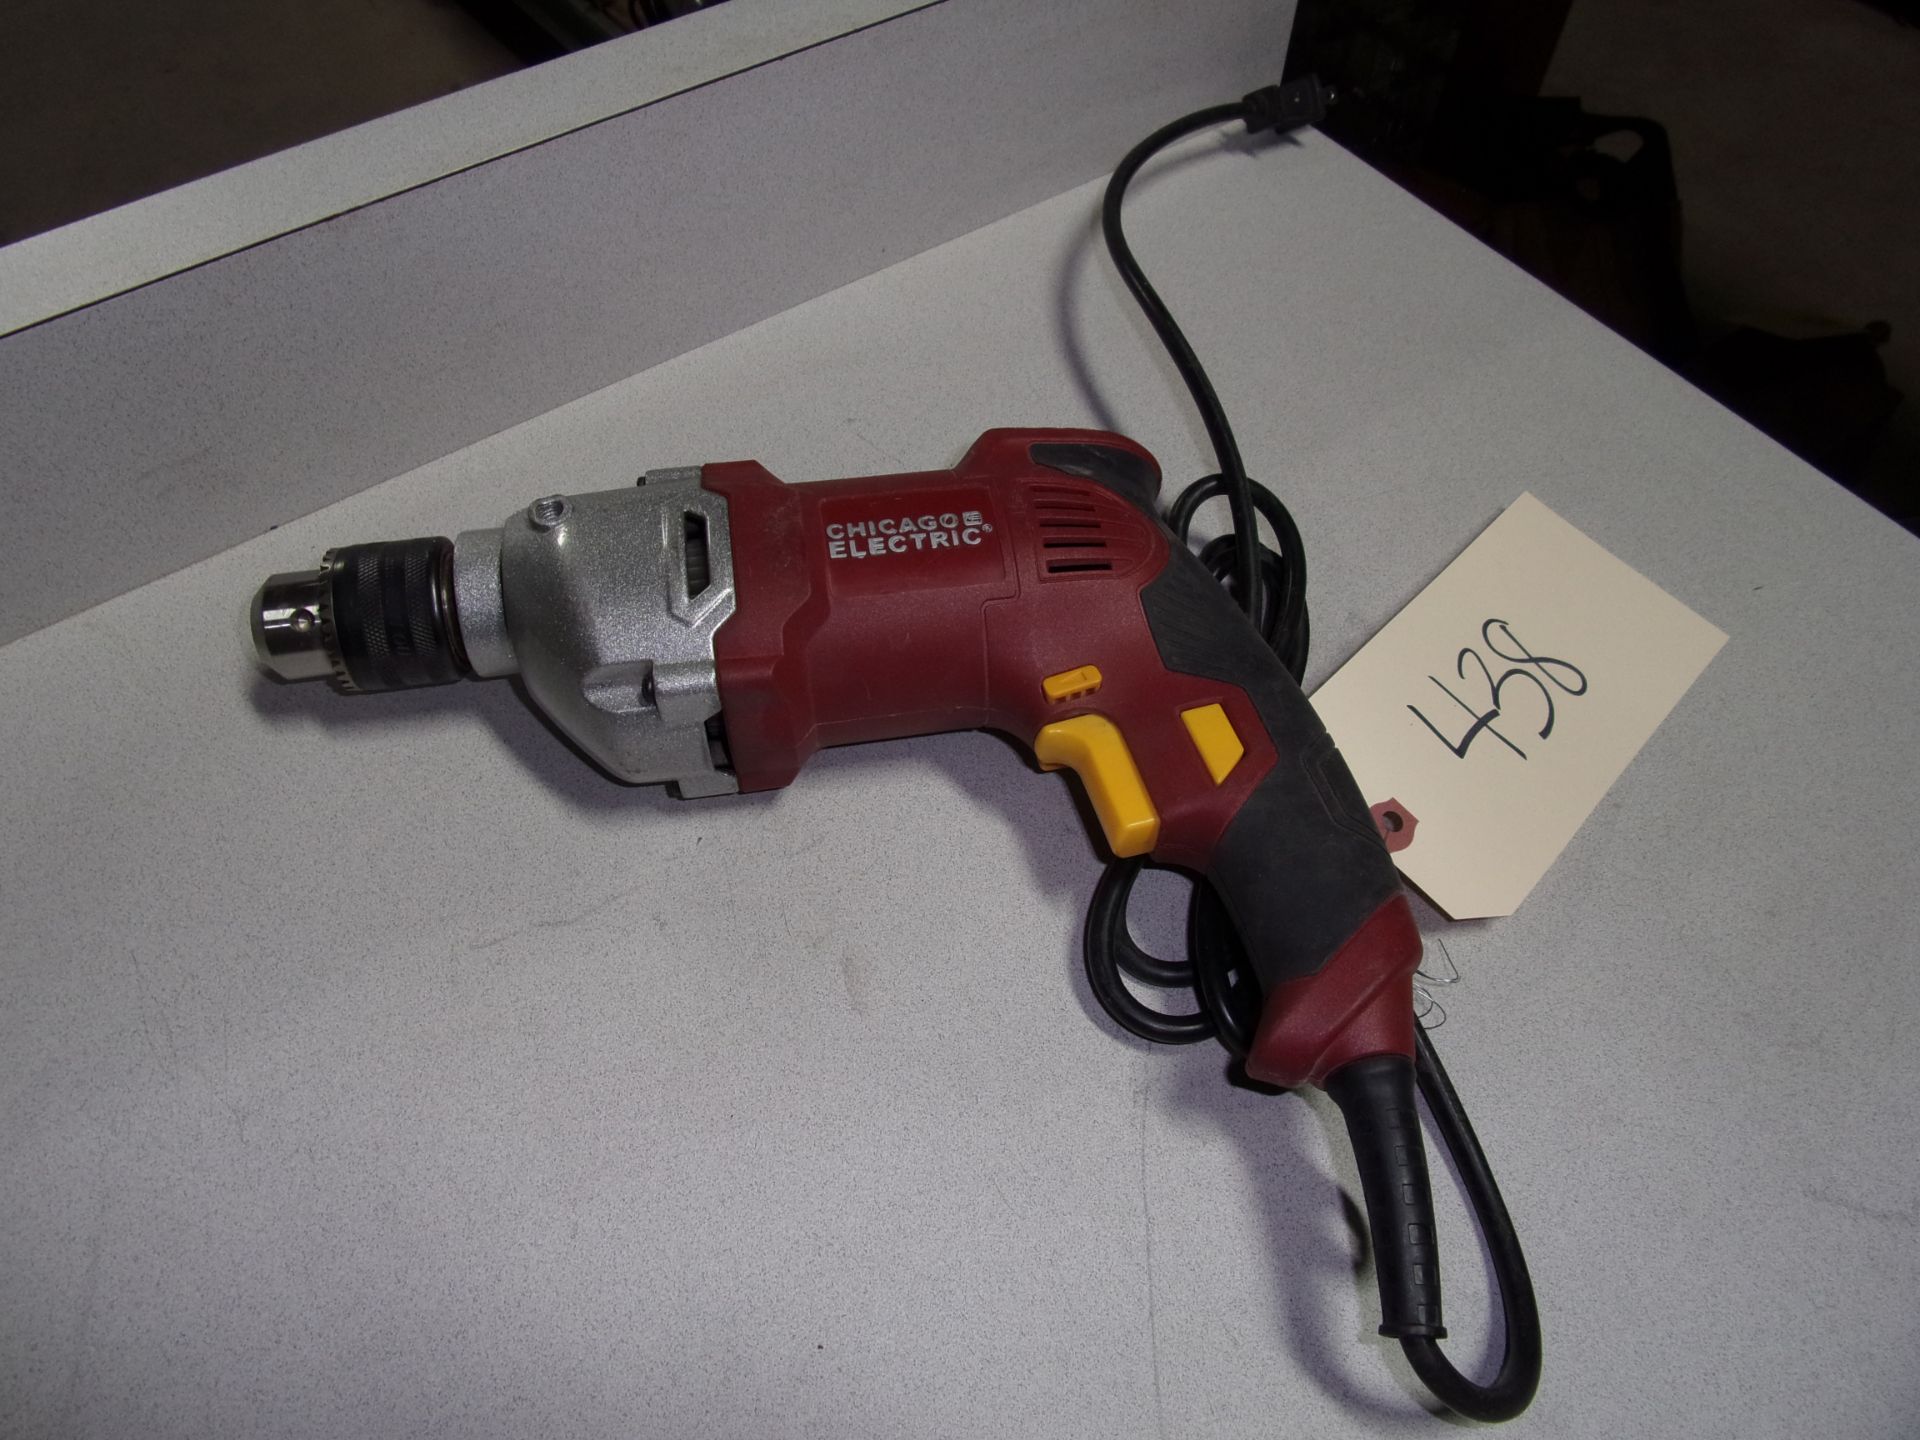 CHICAGO ELECTRIC 1/2" REVERSIBLE DRILL